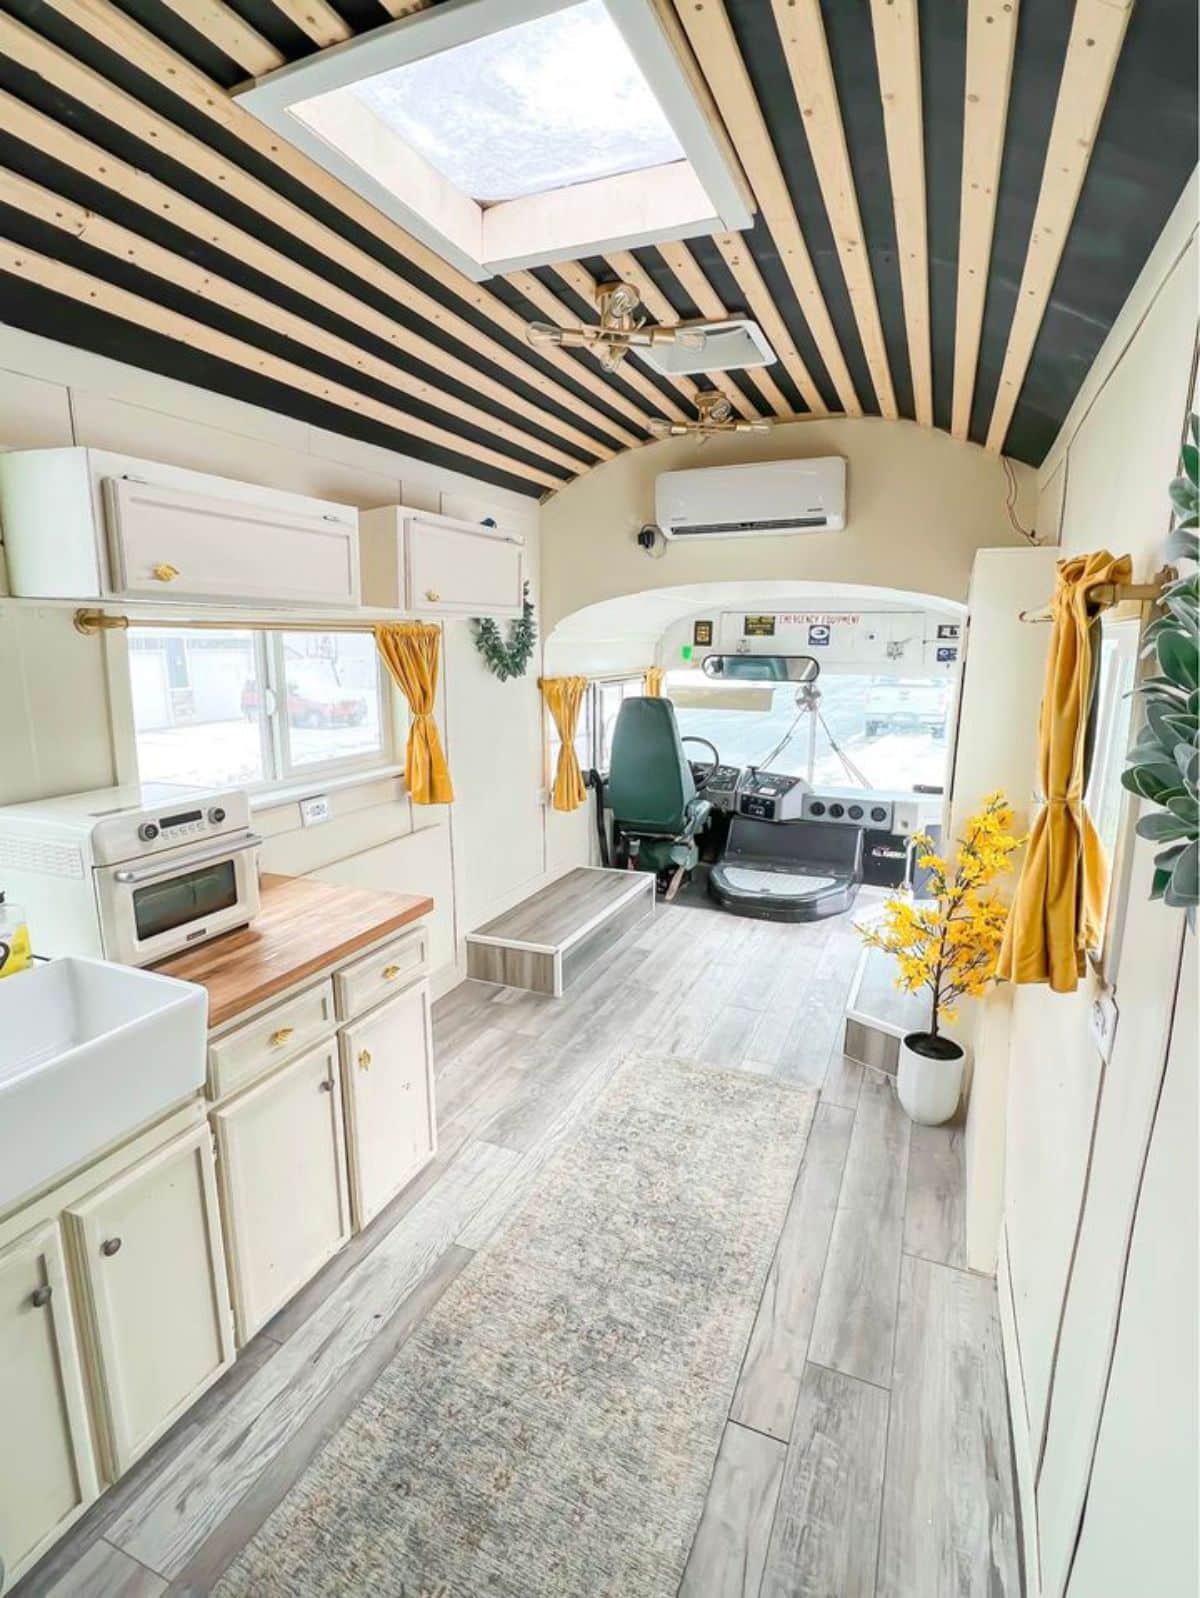 full length interiors with huge open space, air condition unit of Skoolie tiny home